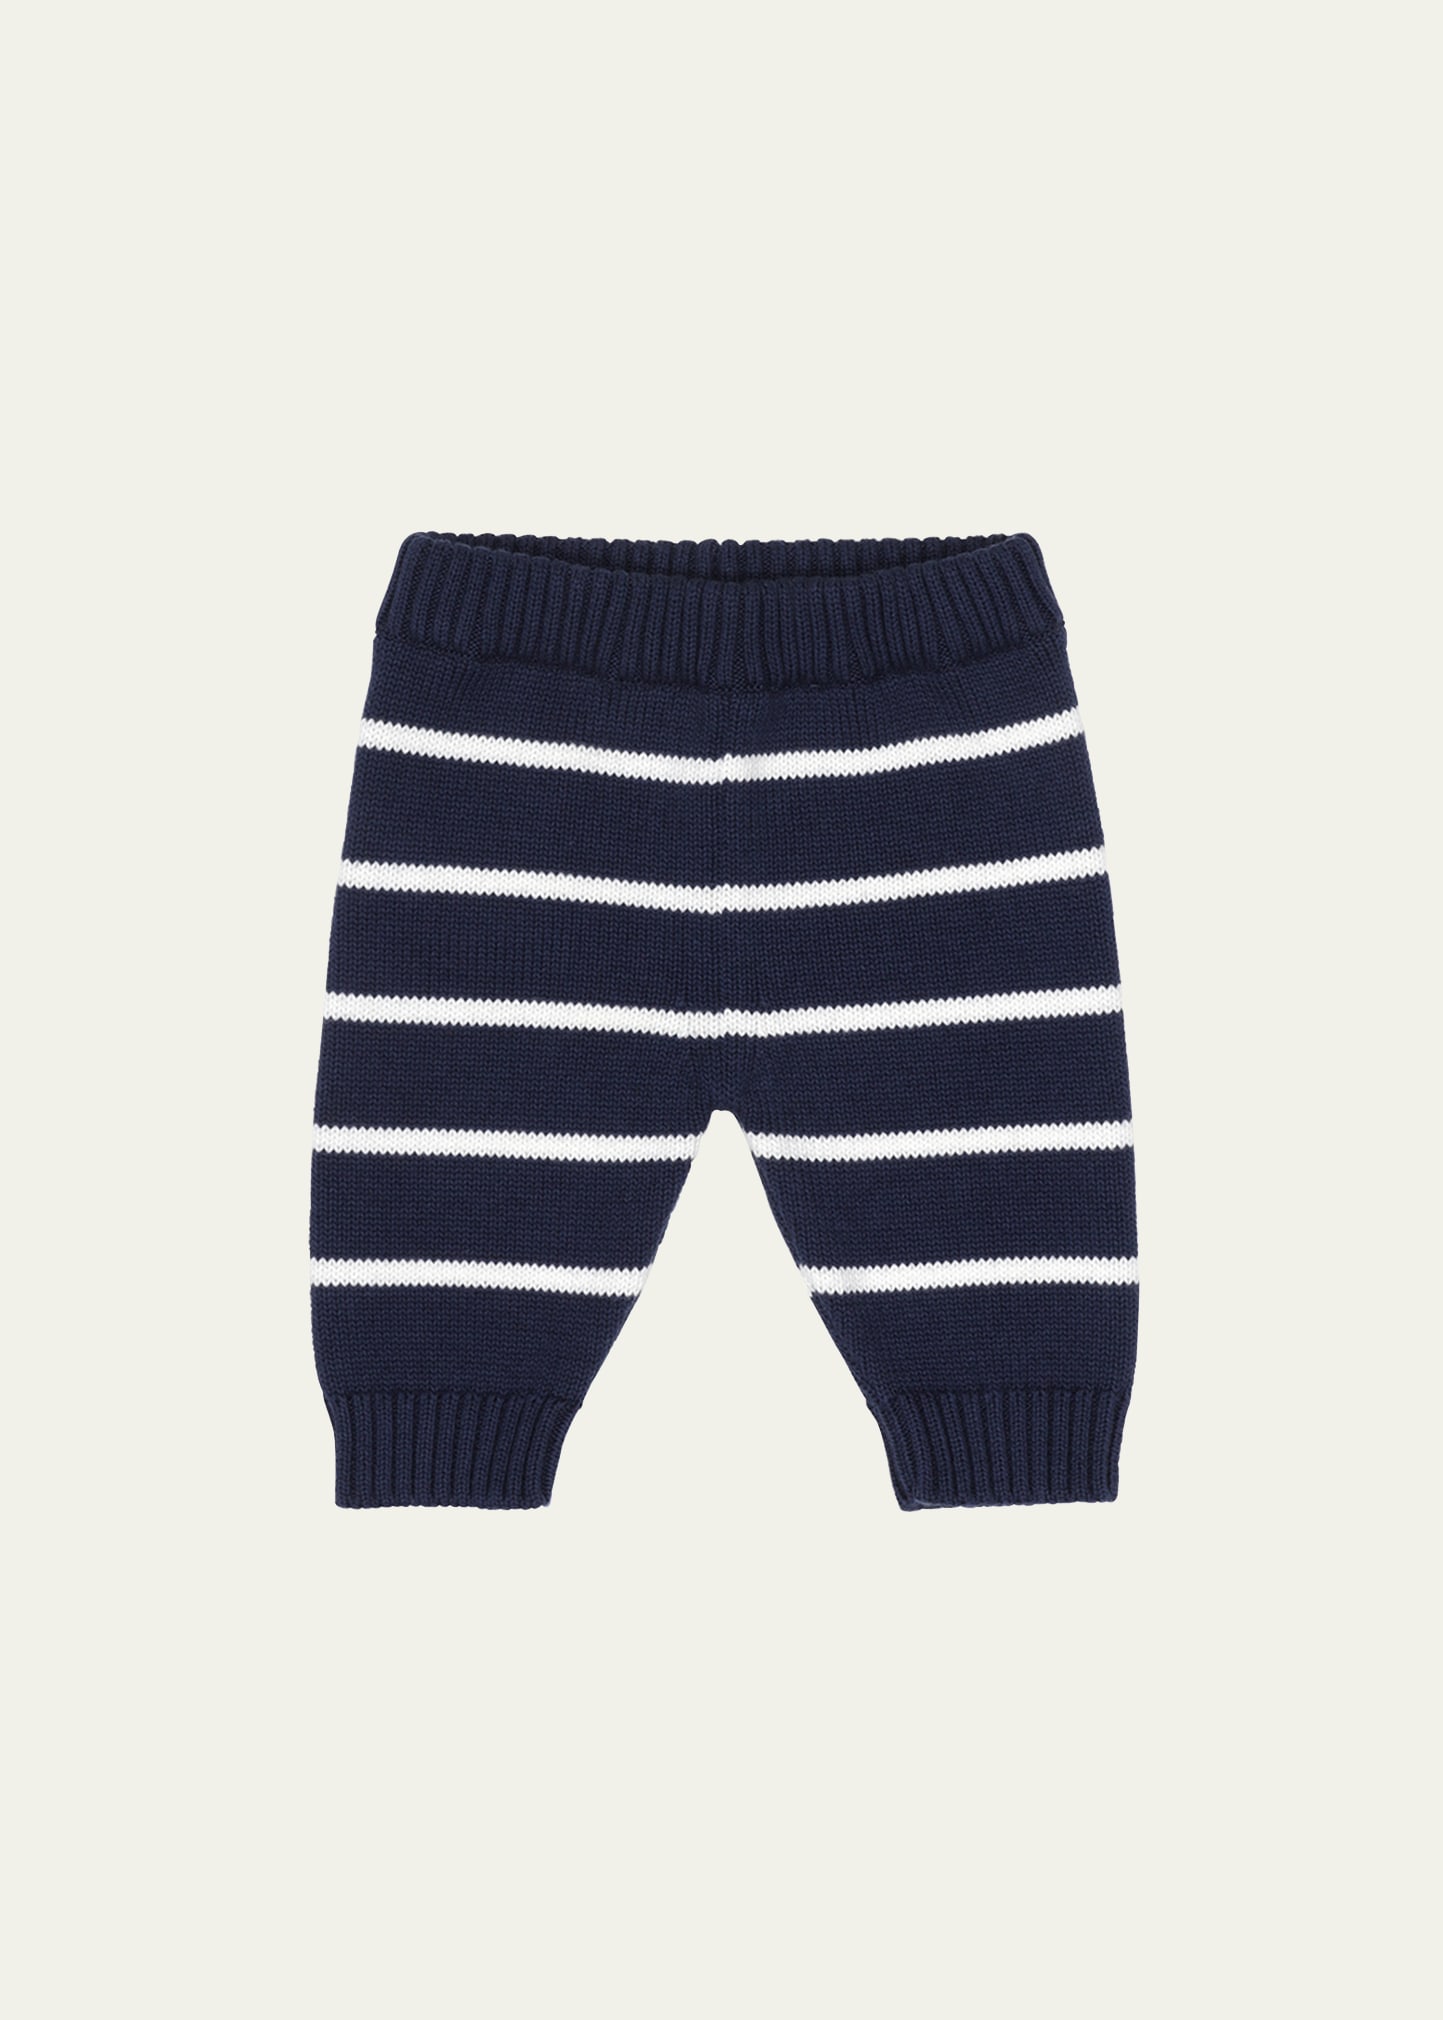 Fendi Kids' Boy's Striped Knitted Pants With Ff Logo In F1i11 Navy